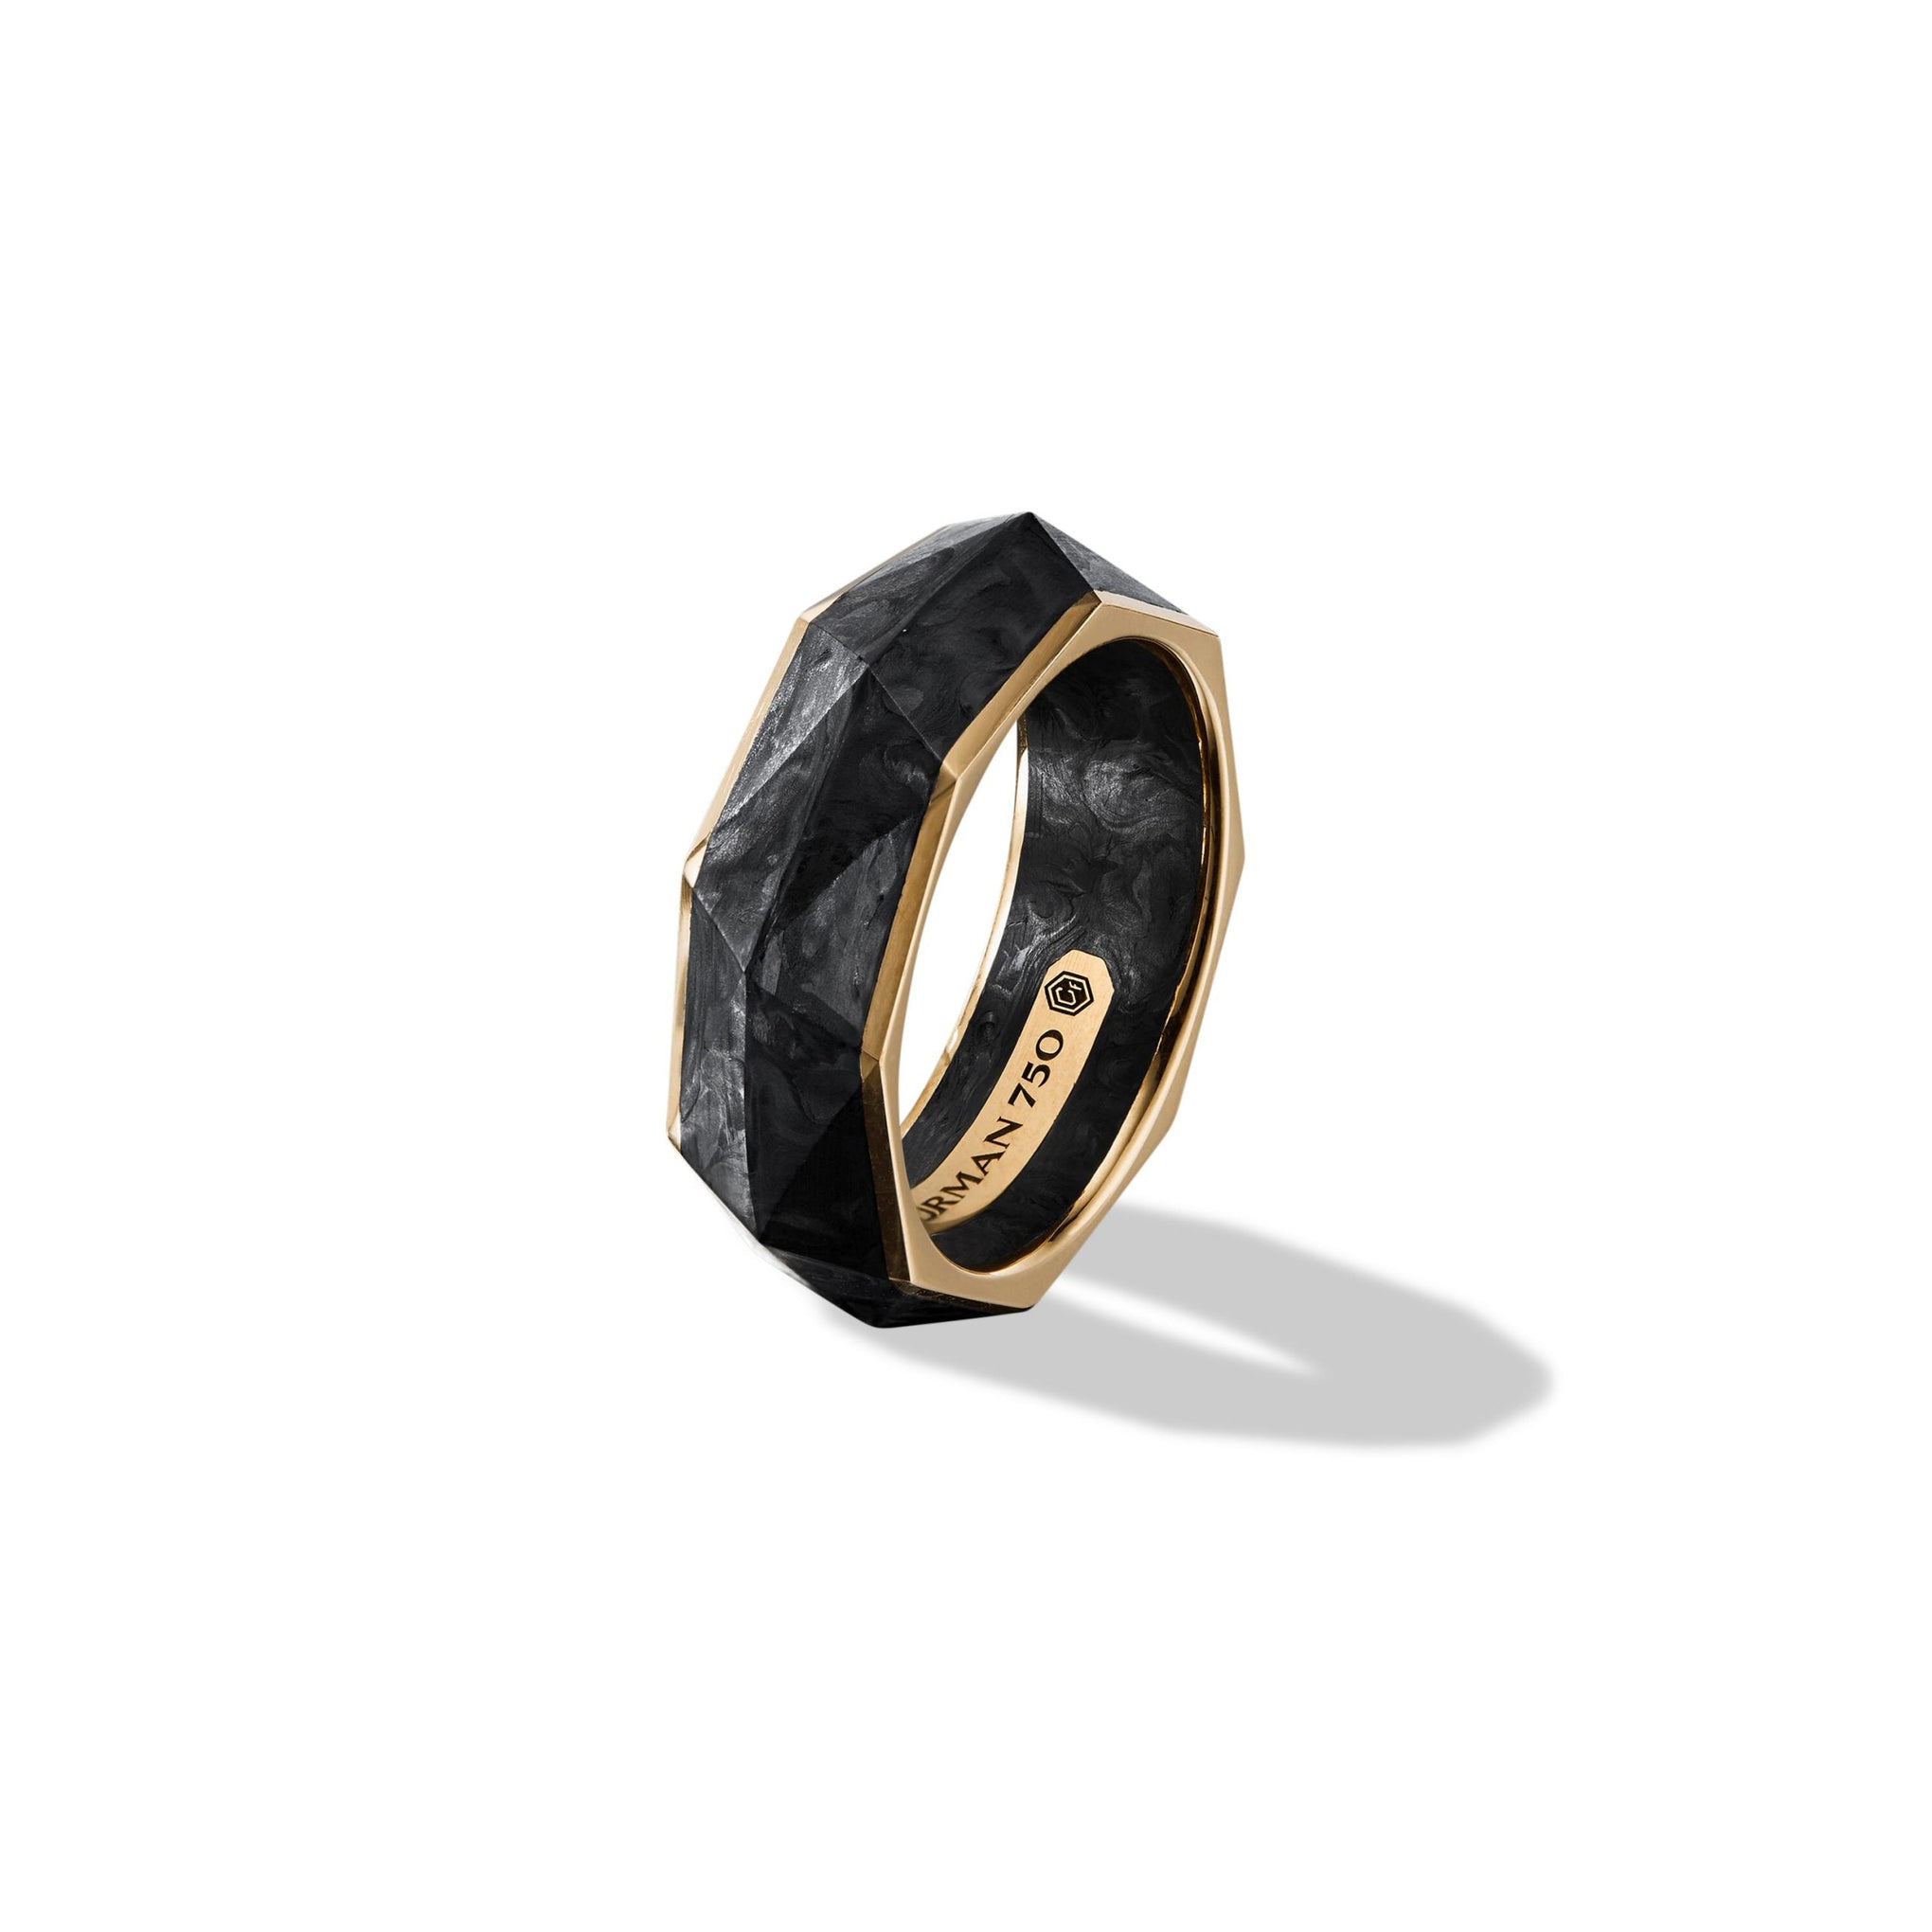 TORQUED FACETED BAND RING IN 18K YELLOW GOLD WITH FORGED CARBON